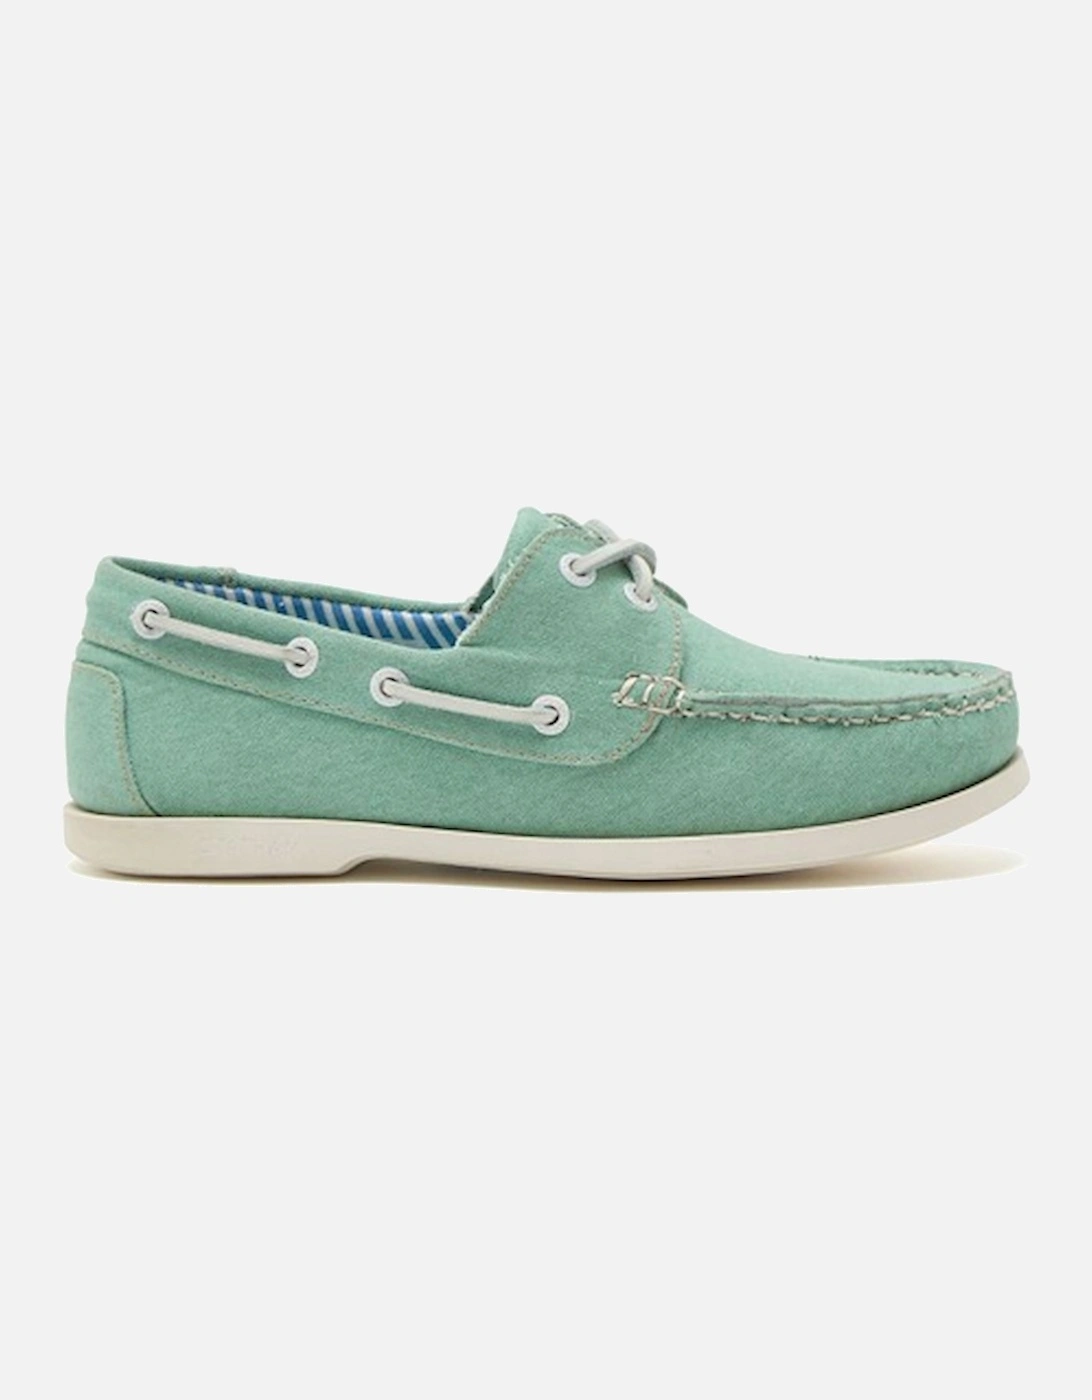 X Joules Women's Jetty Lady Canvas Boat Shoes Green, 6 of 5